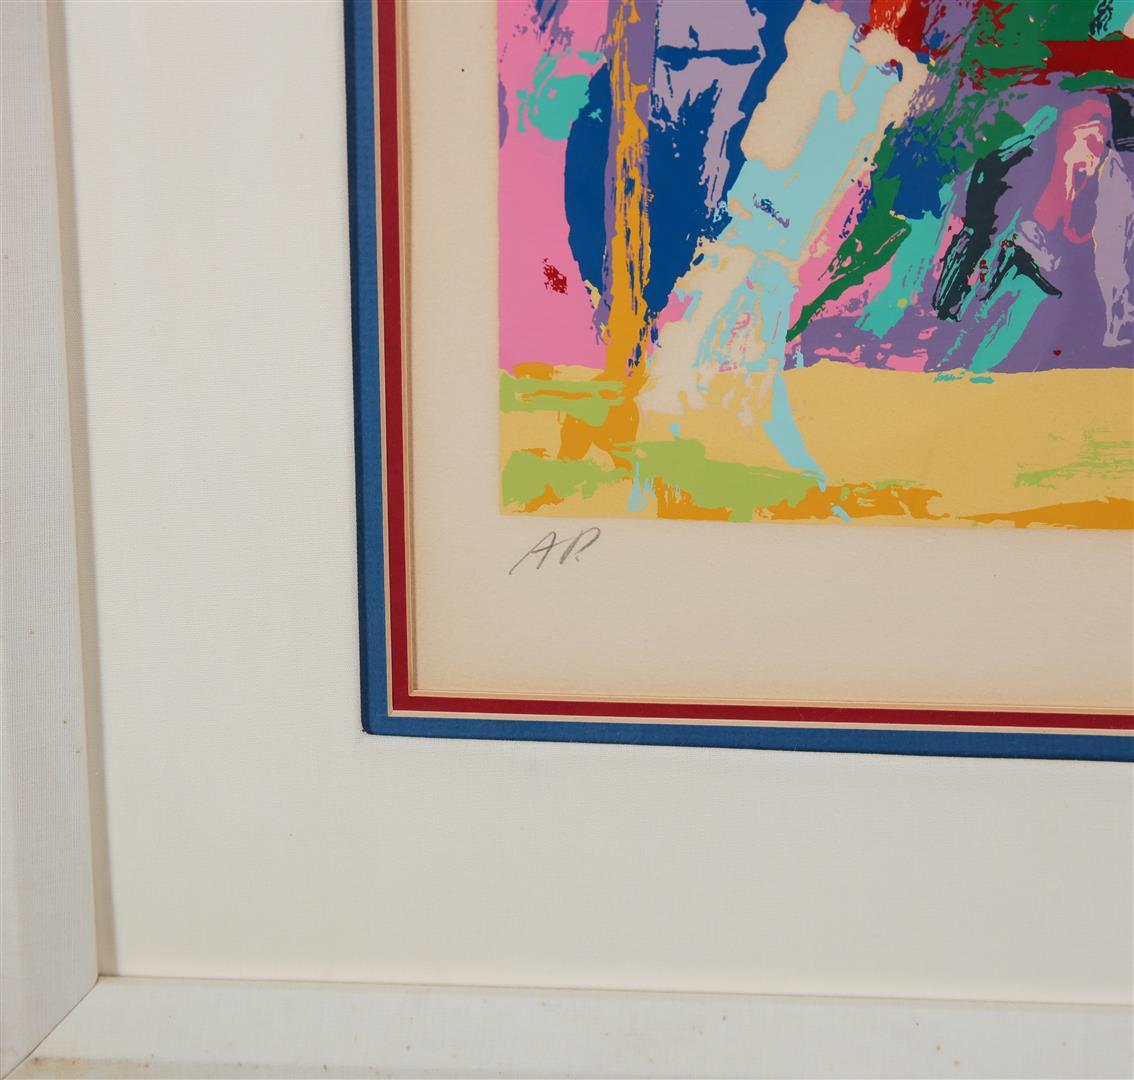 "Frazier vs. Foreman Zaire '73" by LeRoy Neiman - Limited Edition Serigraph